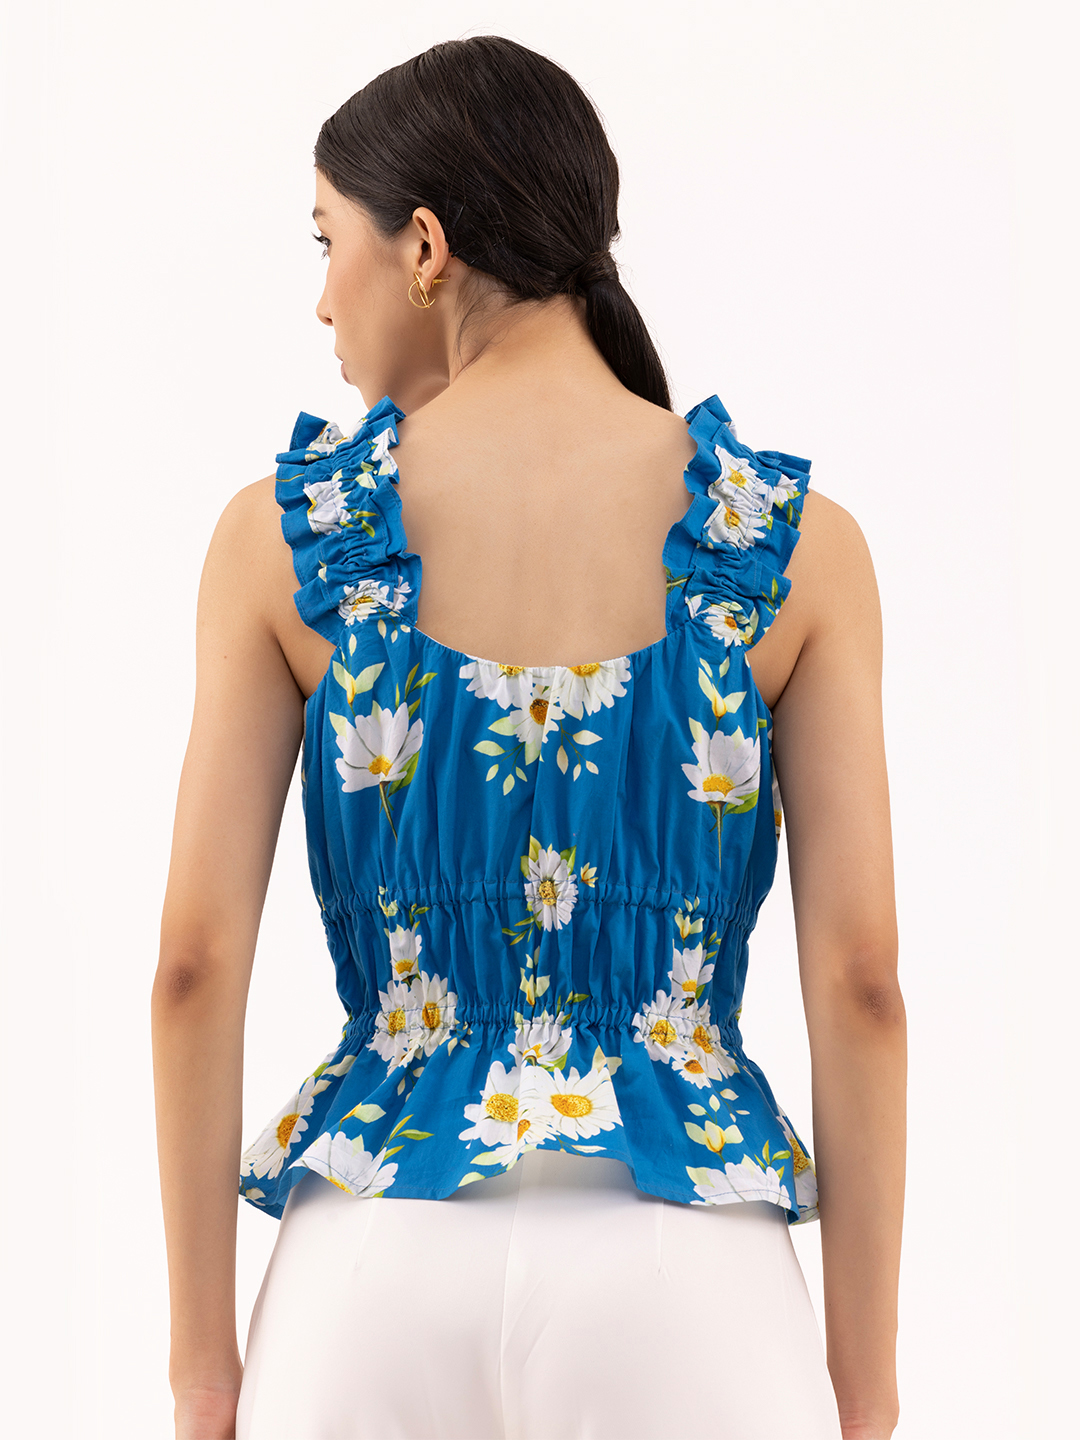 Ruffle It Up With Printed Daisy Peplum Top - Back